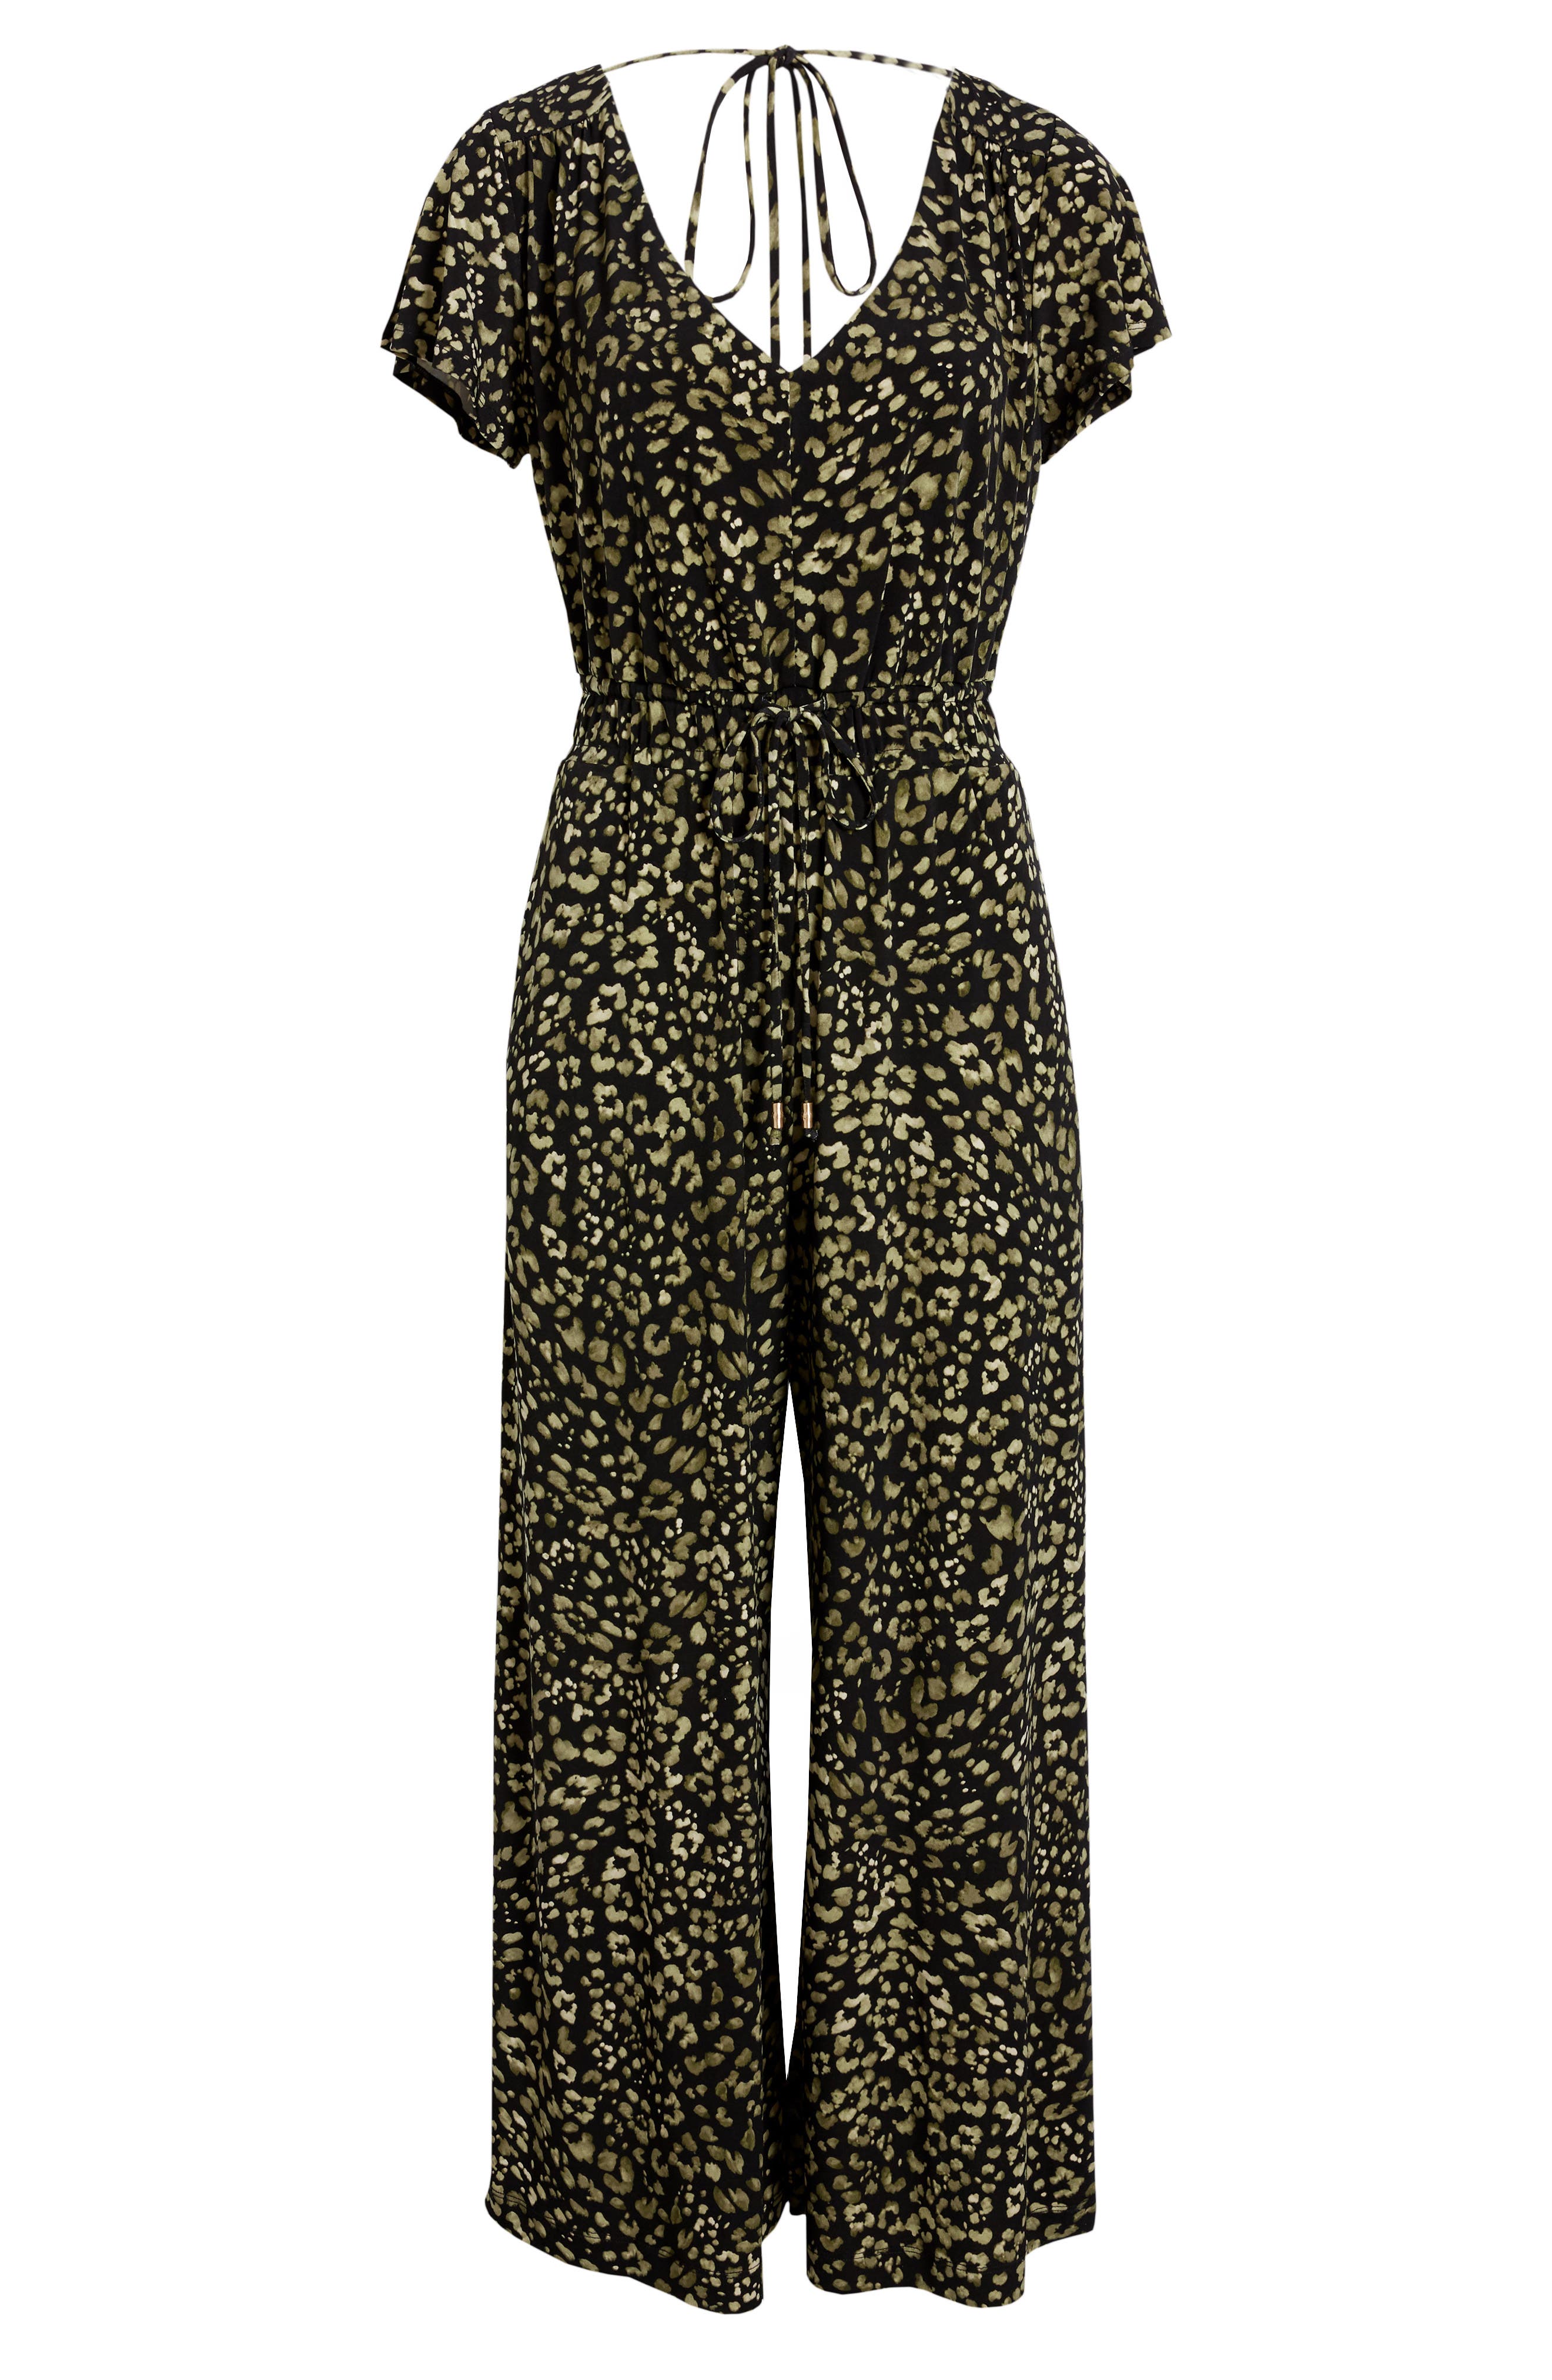 tommy bahama womens jumpsuit